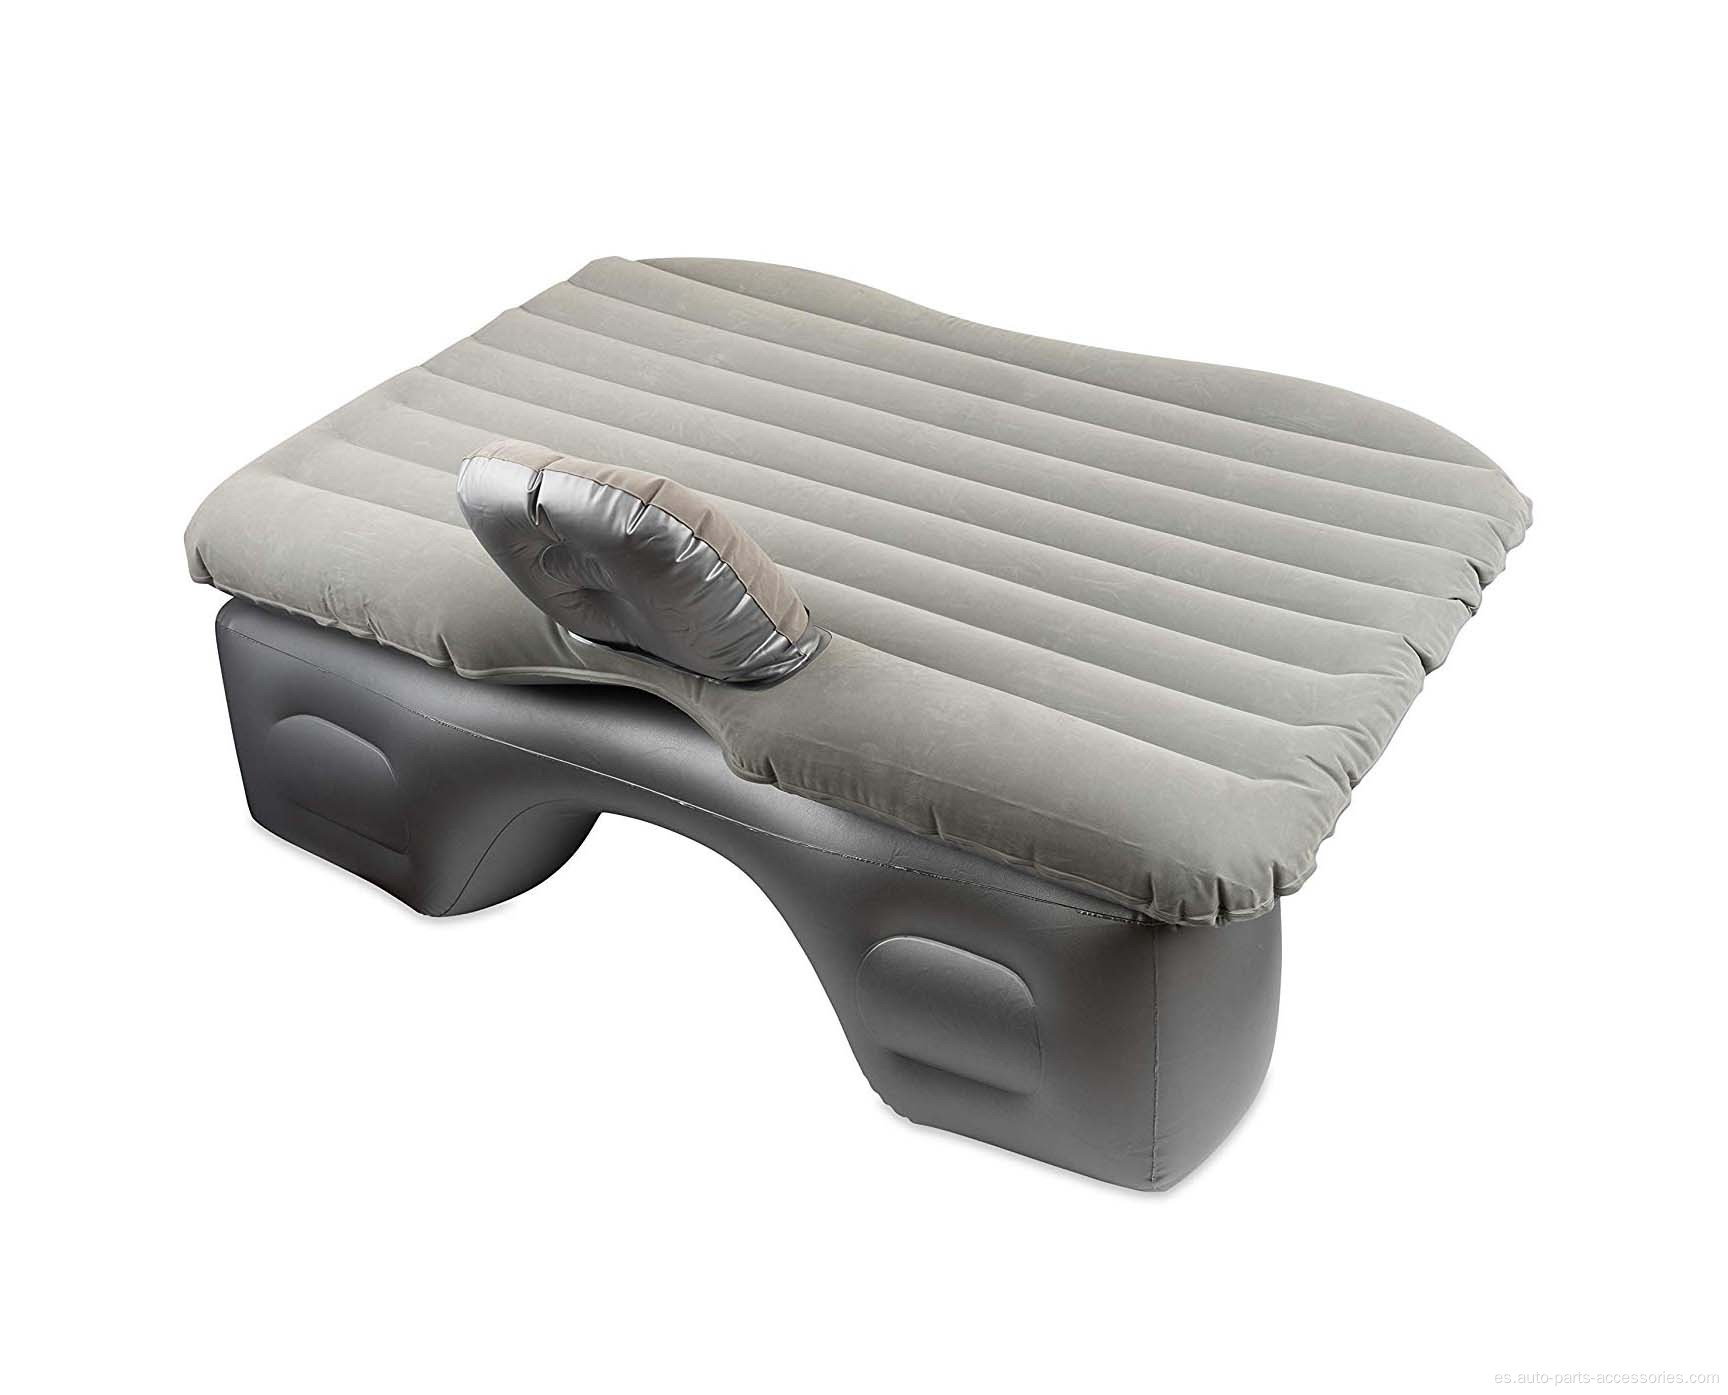 Travel Travelmattress Air Cama inflable